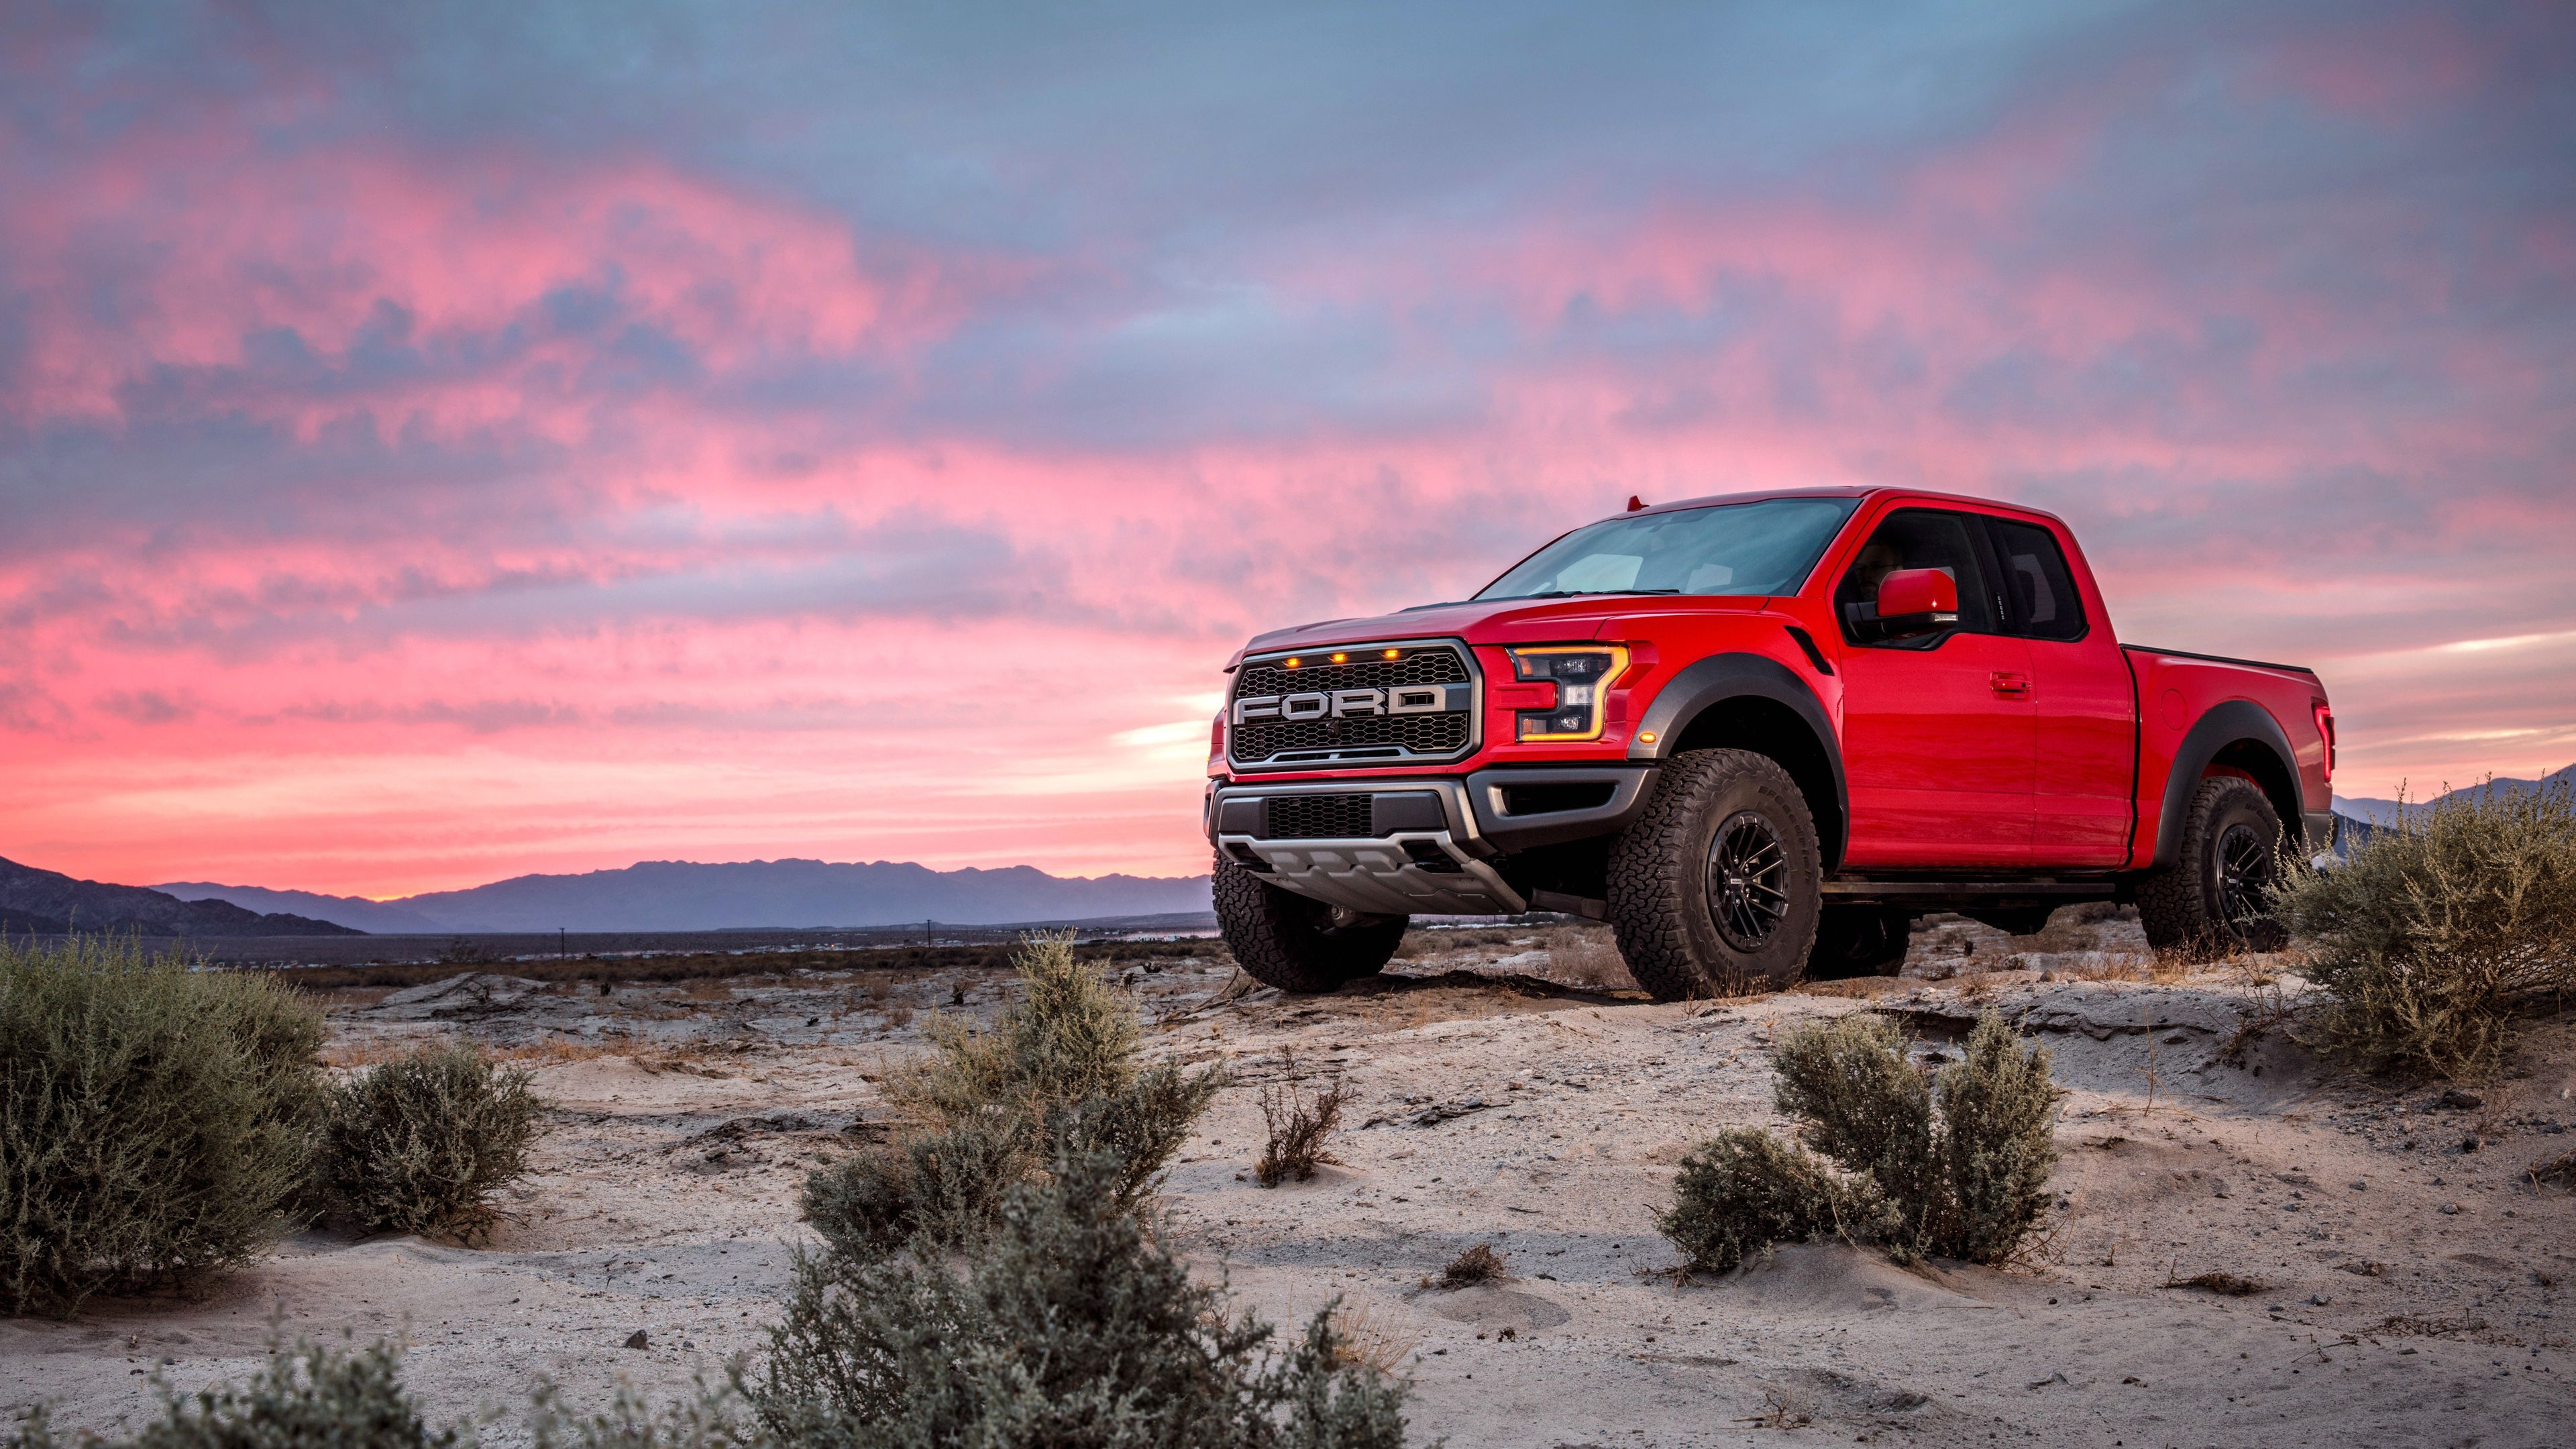 Ford F-150, Tough and durable, High-quality wallpapers, Built to conquer, 3840x2160 4K Desktop